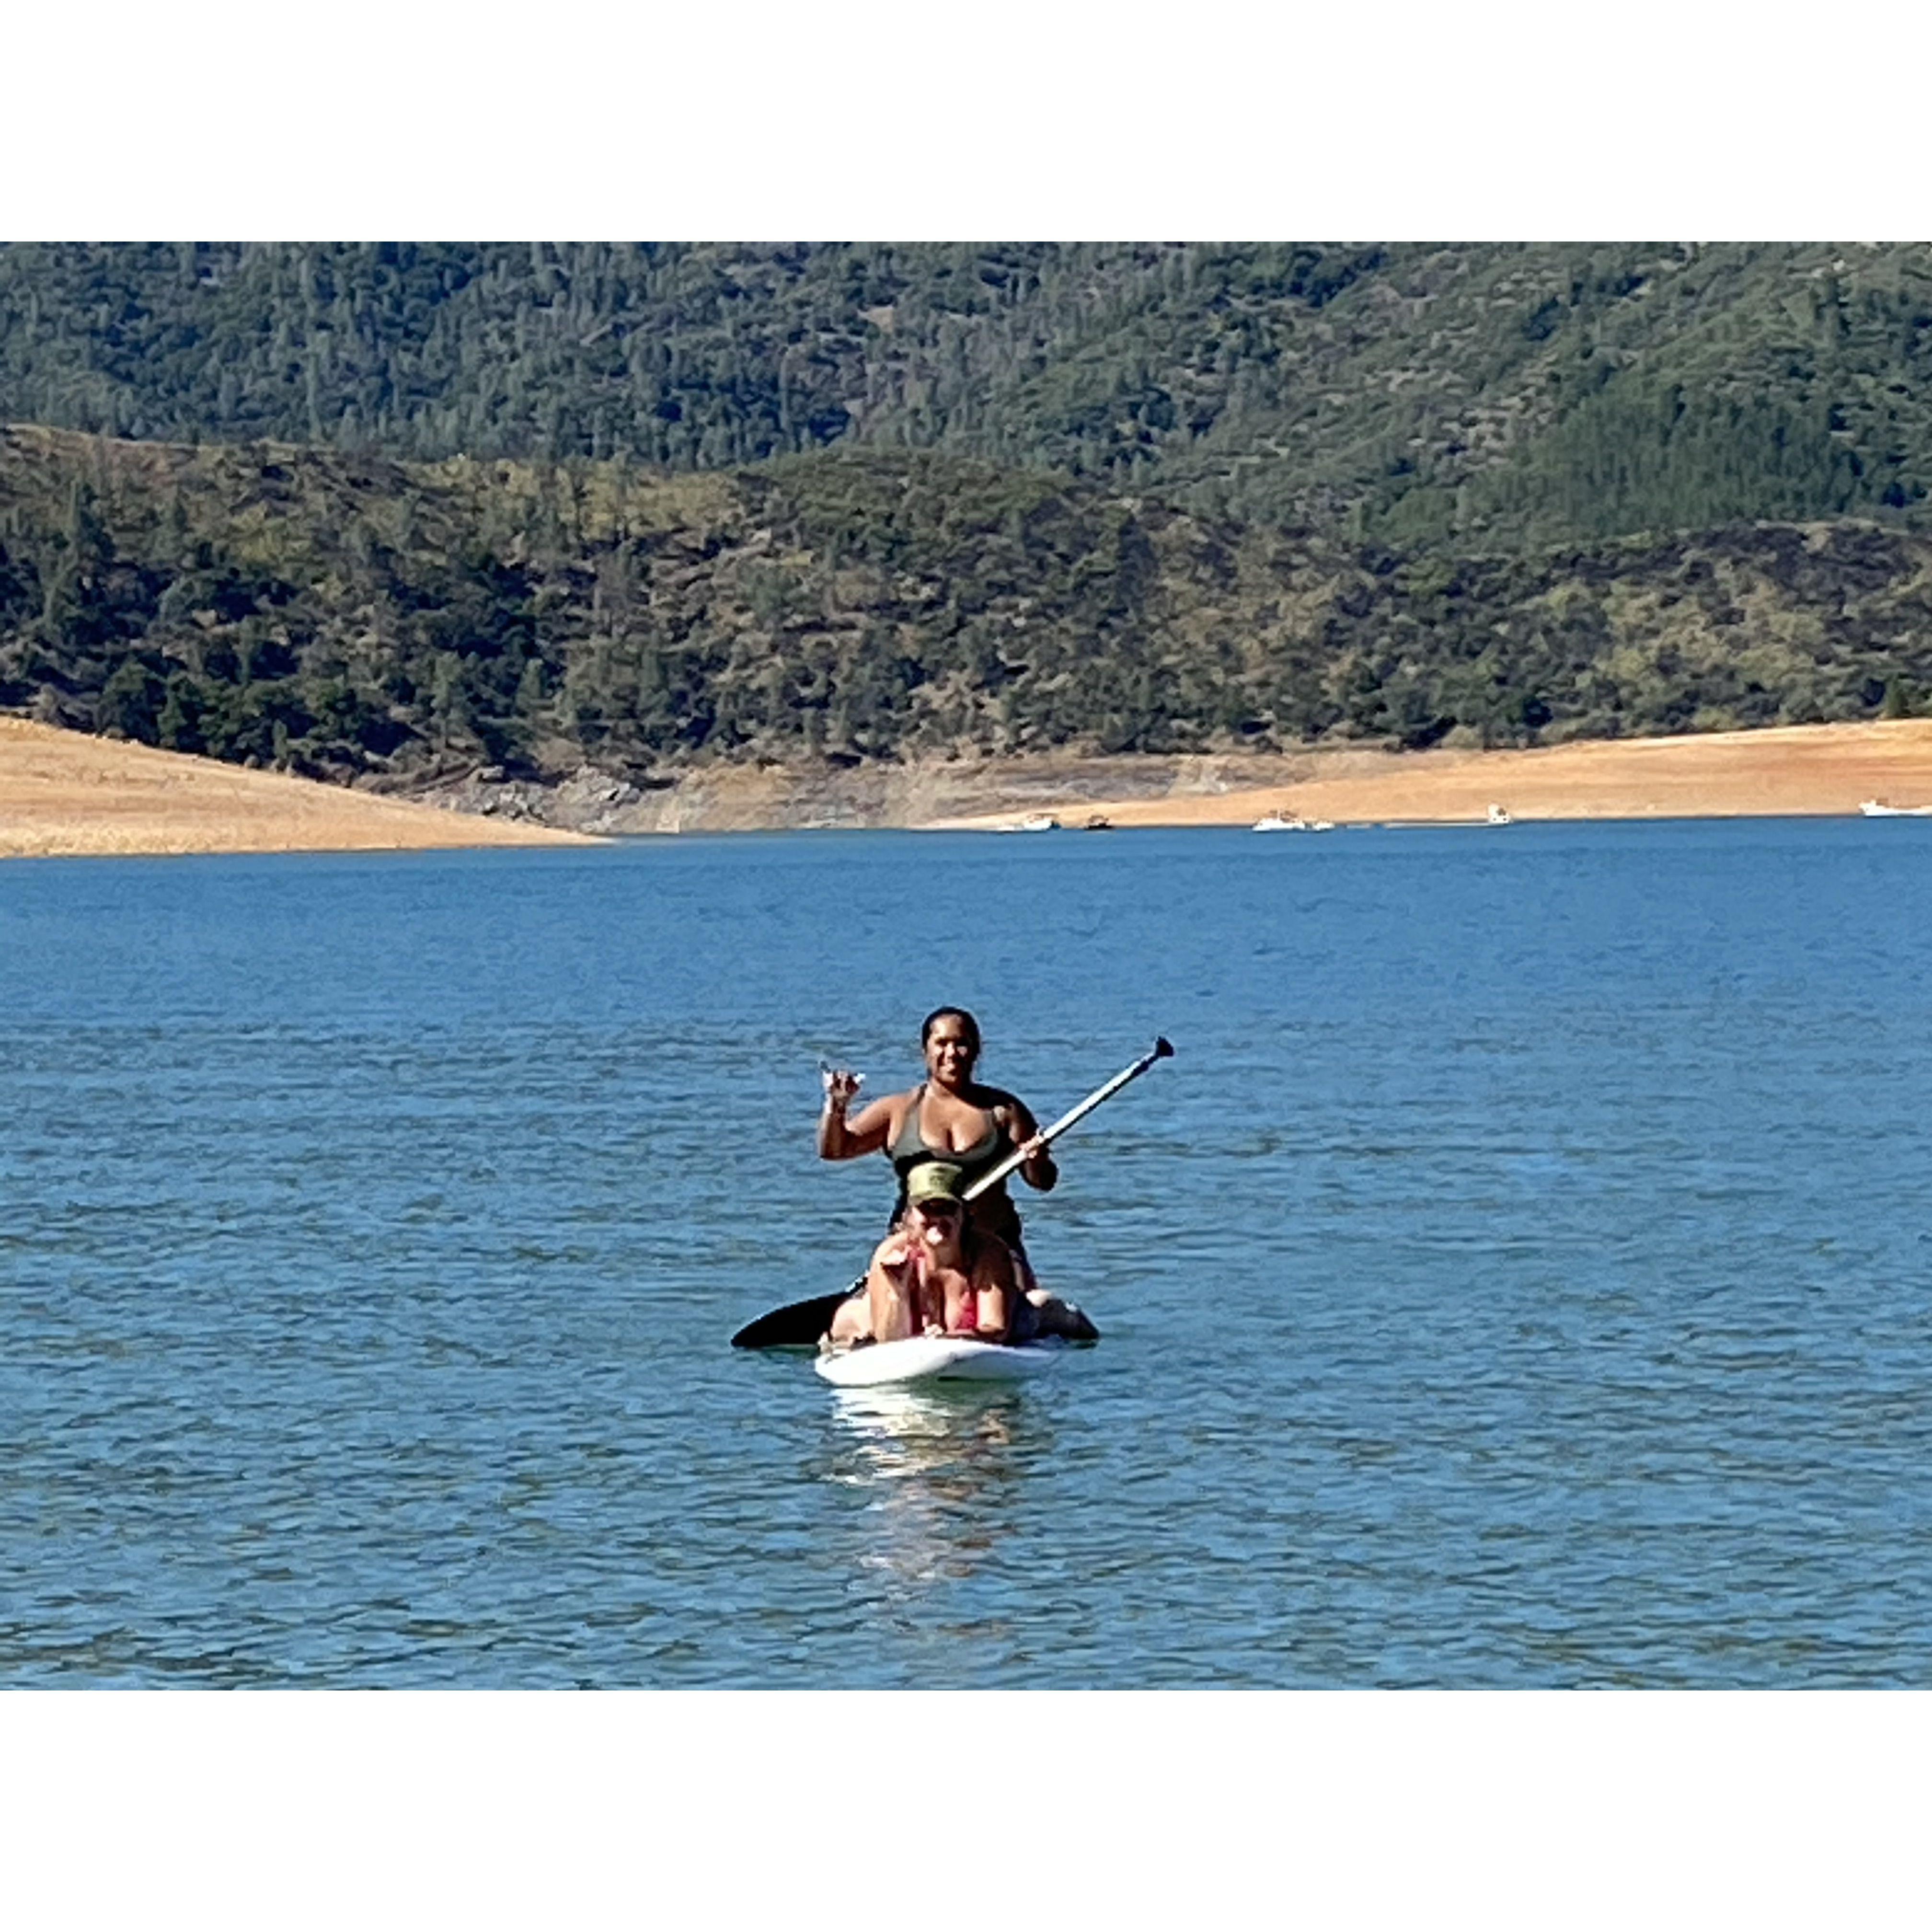 Covid trip to Cali to spend time on the Lake with Lindsey's parents. Paddle boarding on Shasta Lake.